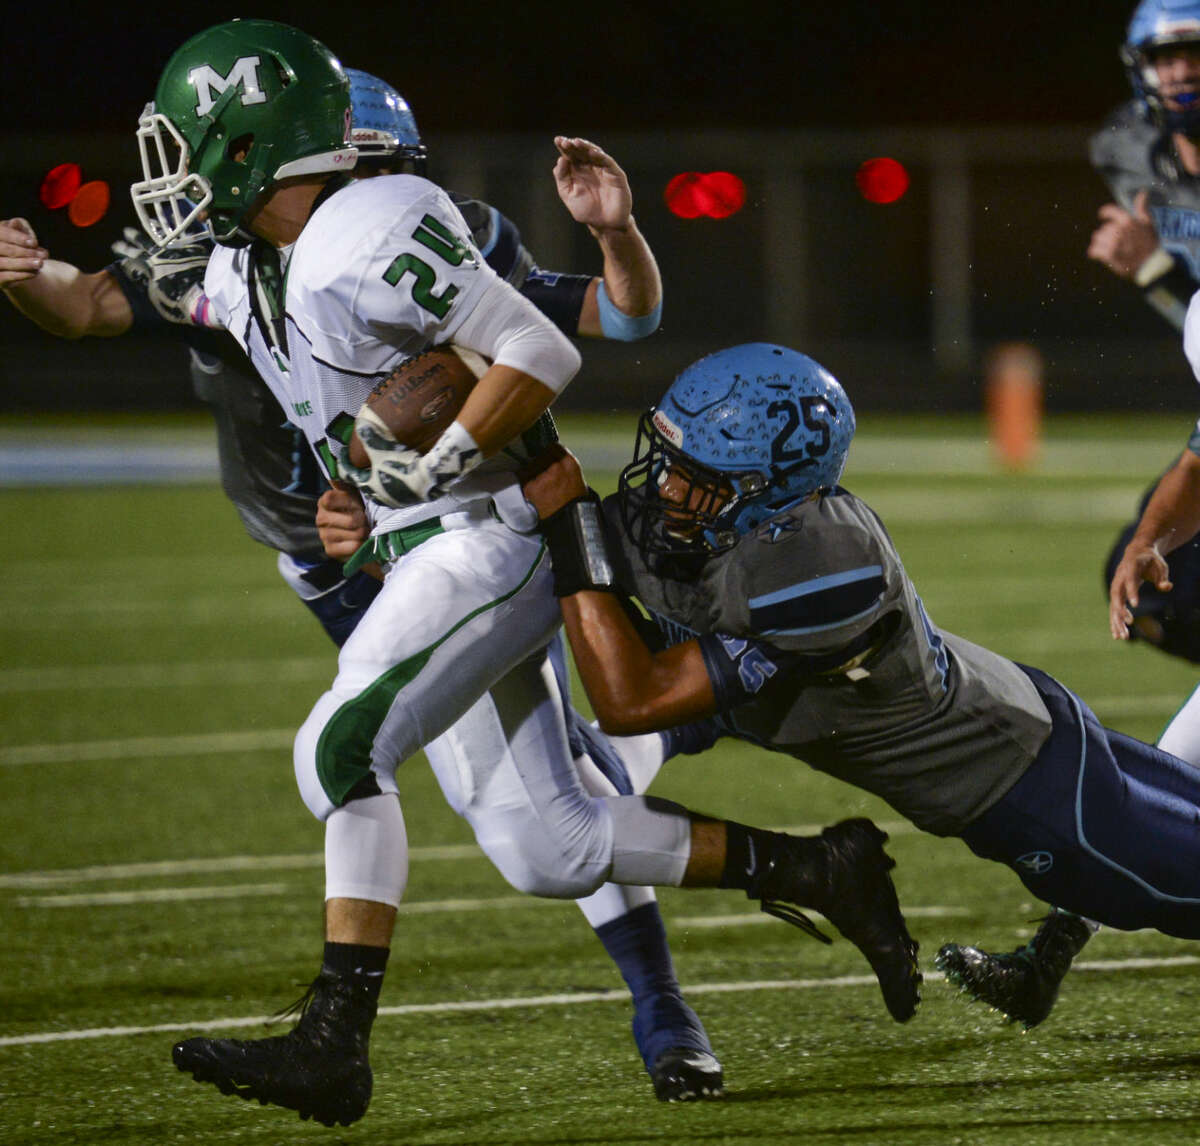 Monahans' Maurilio Marquez looks for more yards as Greenwood's Fabian Madrid holds on Friday 10-30-2015 at J.M. King Memorial Stadium. Tim Fischer\Reporter-Telegram